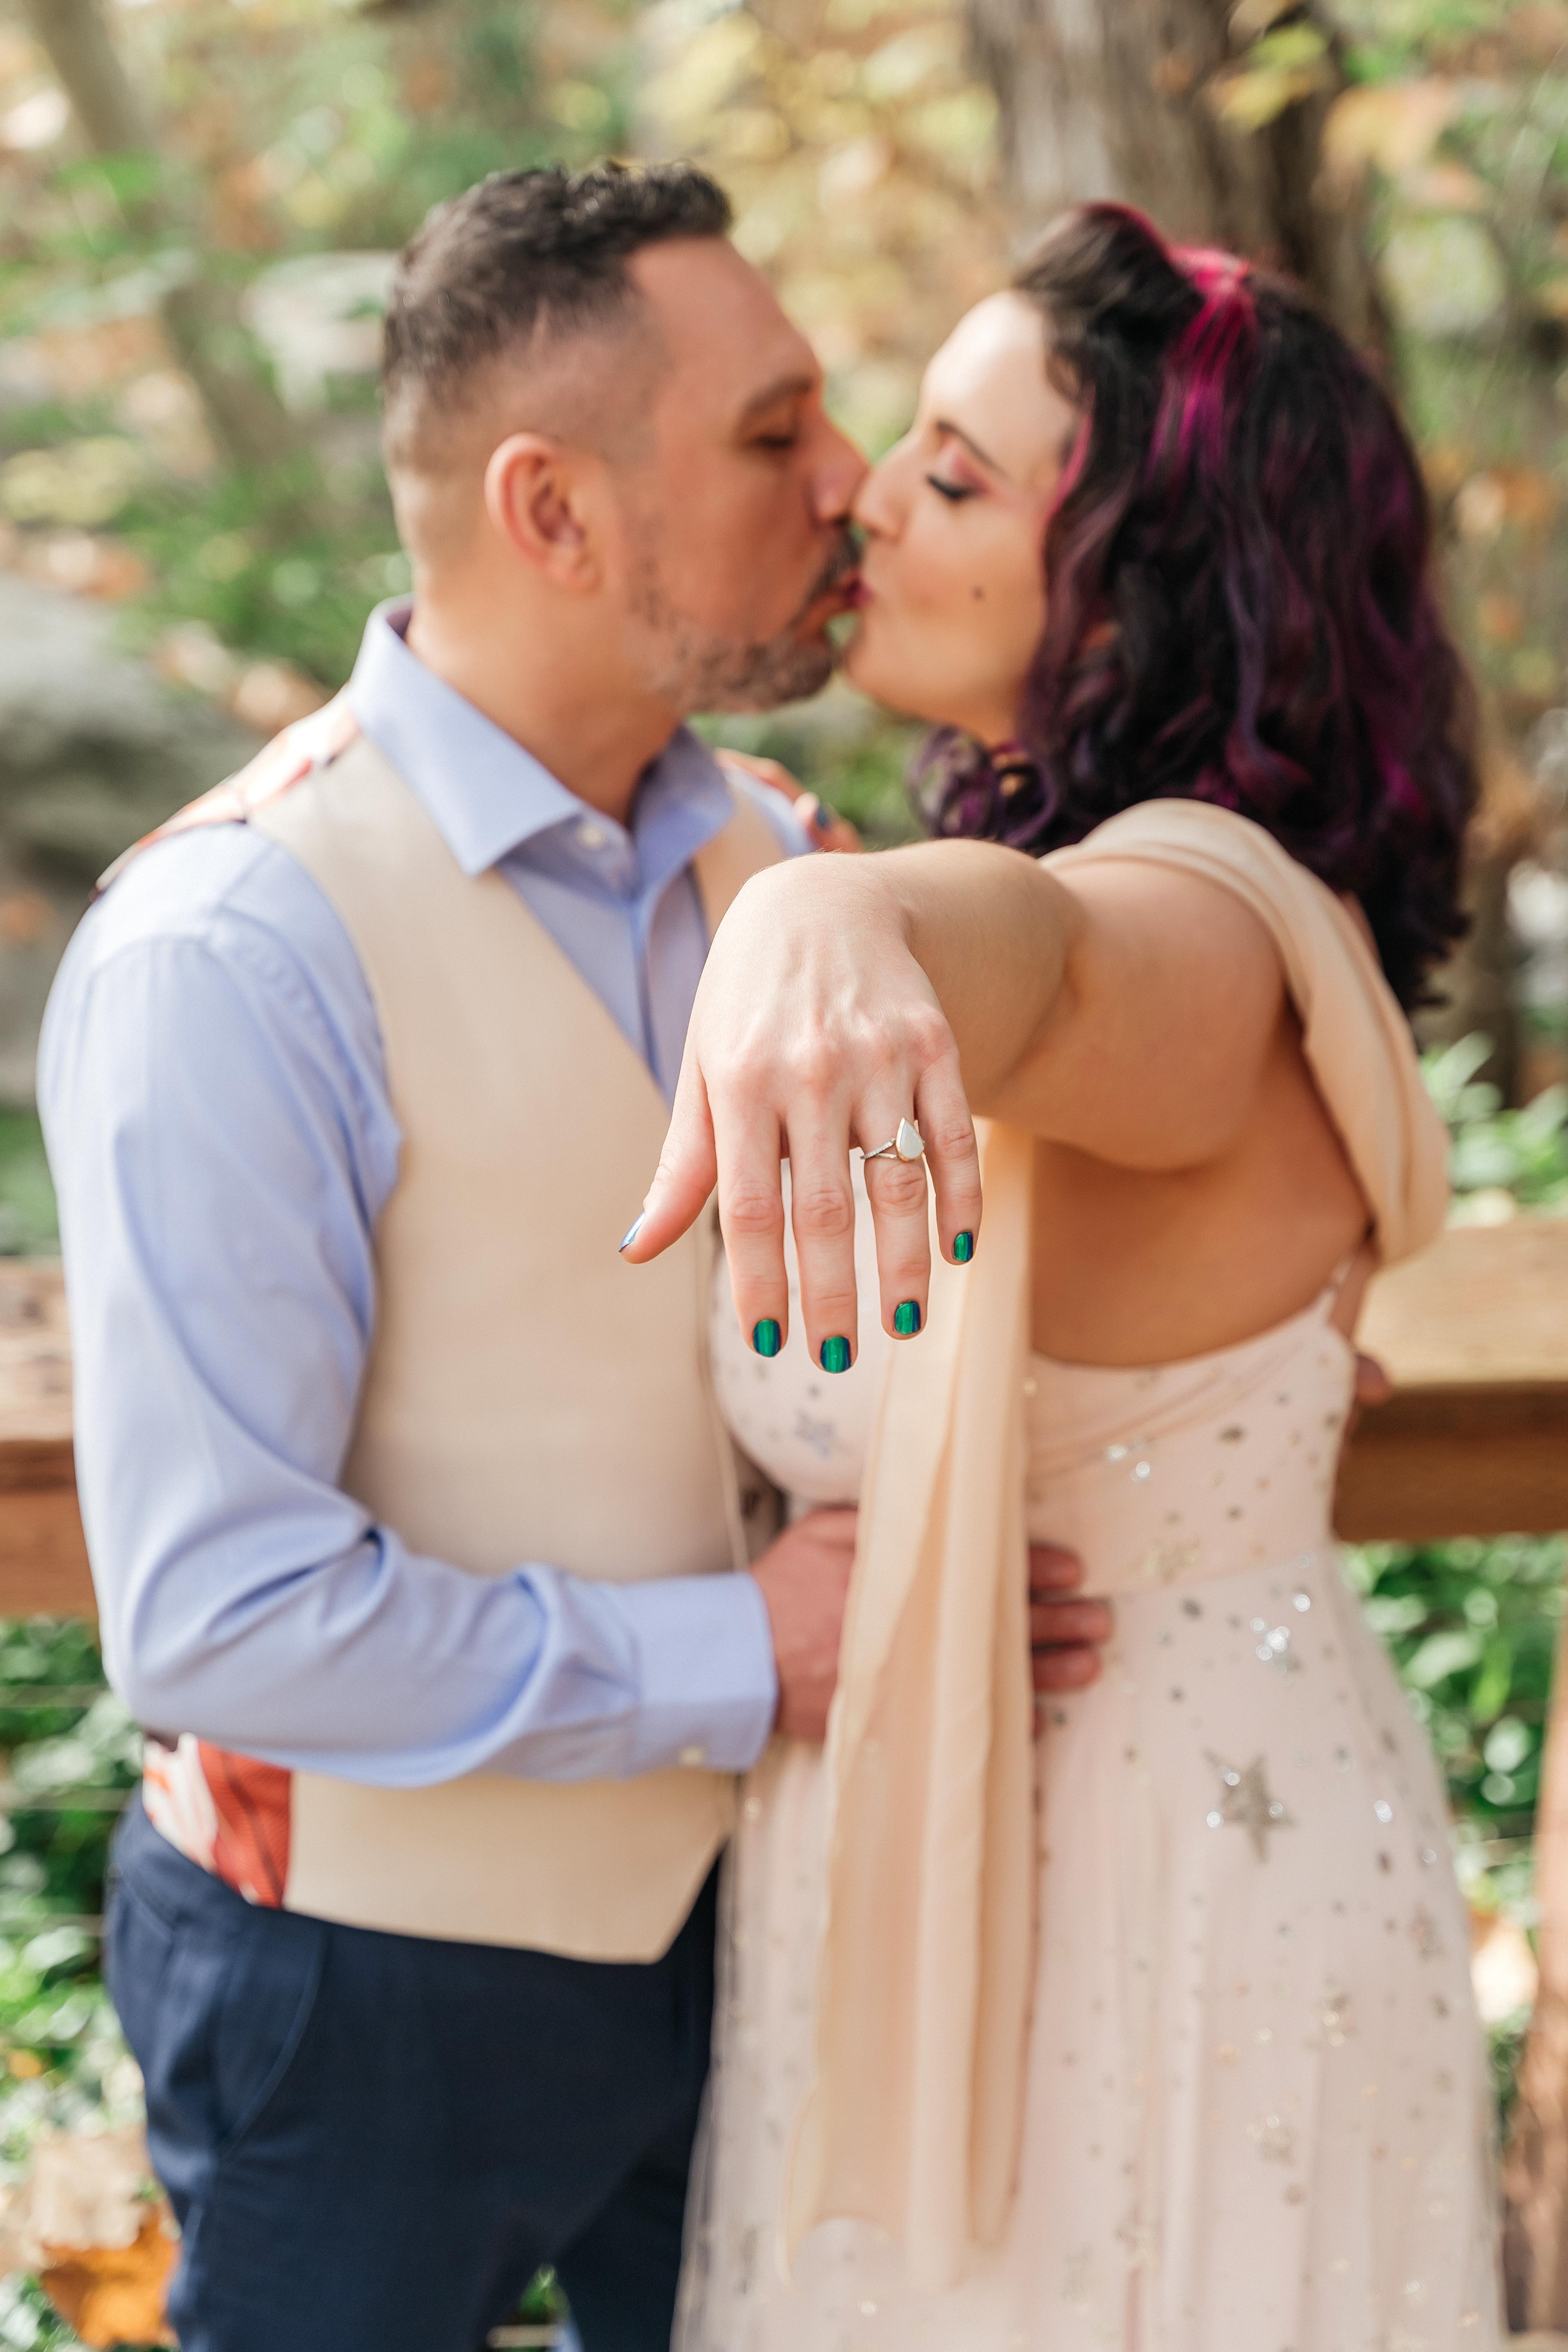 The Wedding Website of Jacquelyn Fanno and Manny Kourkelian